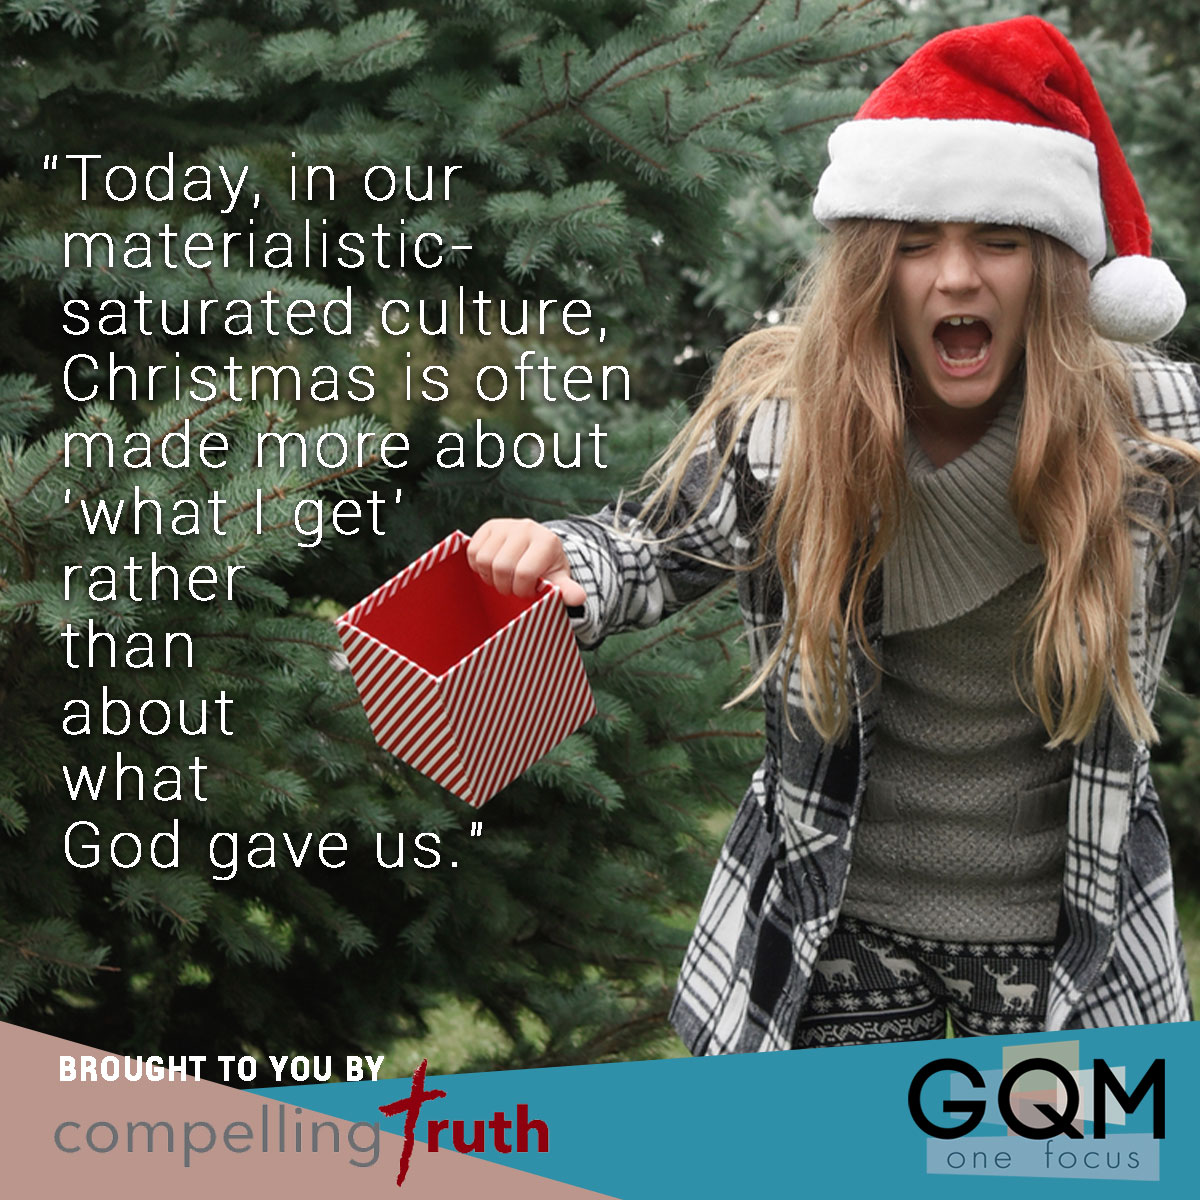 Does giving gifts take away from the true meaning of Christmas?